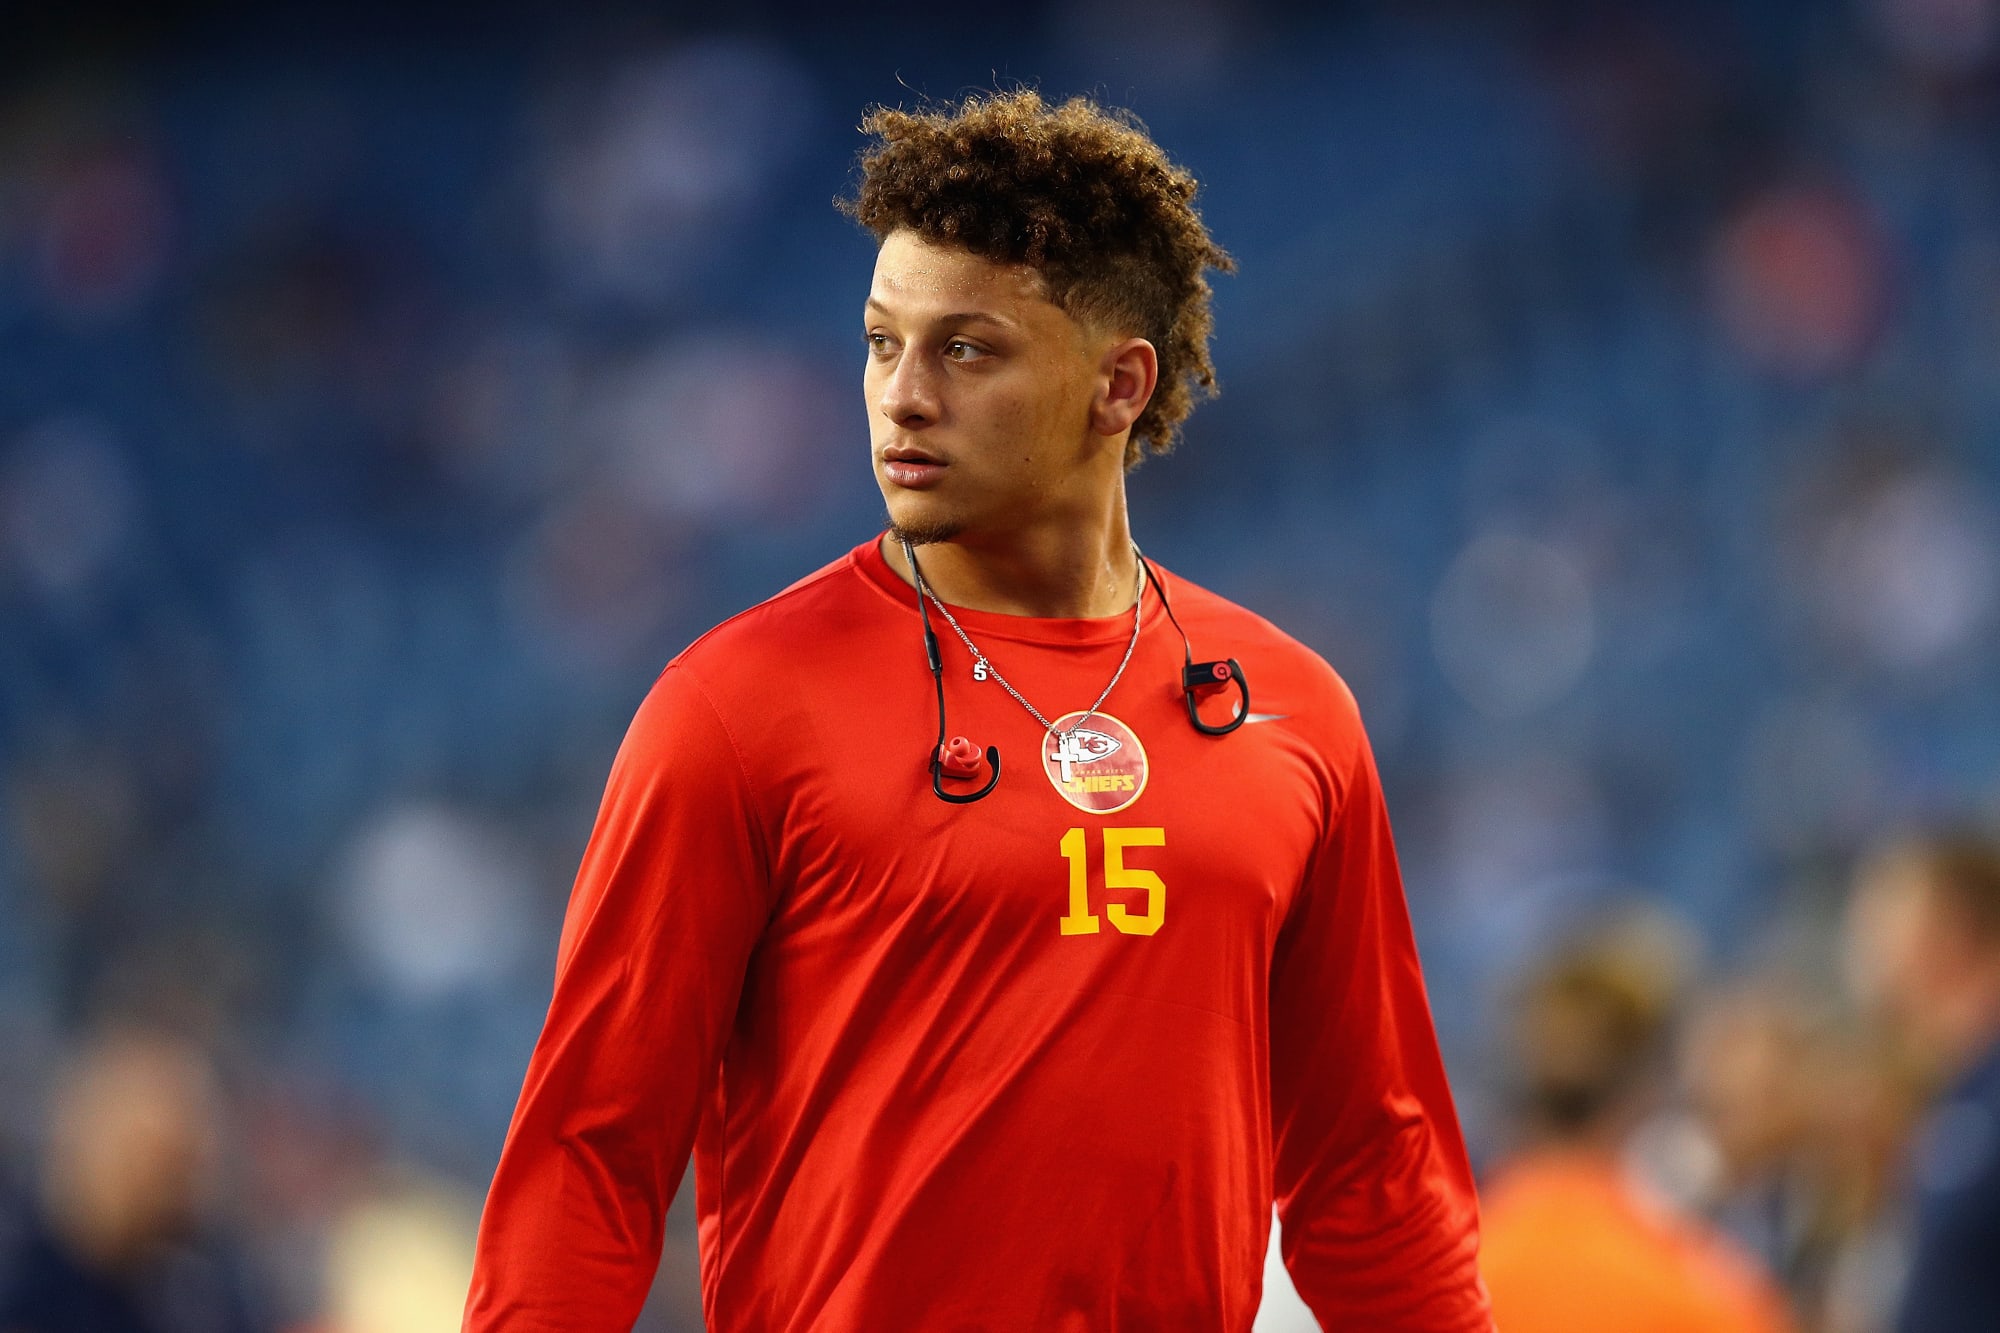 Stay with me': Patrick Mahomes' untouchable Kansas City bond - The Athletic